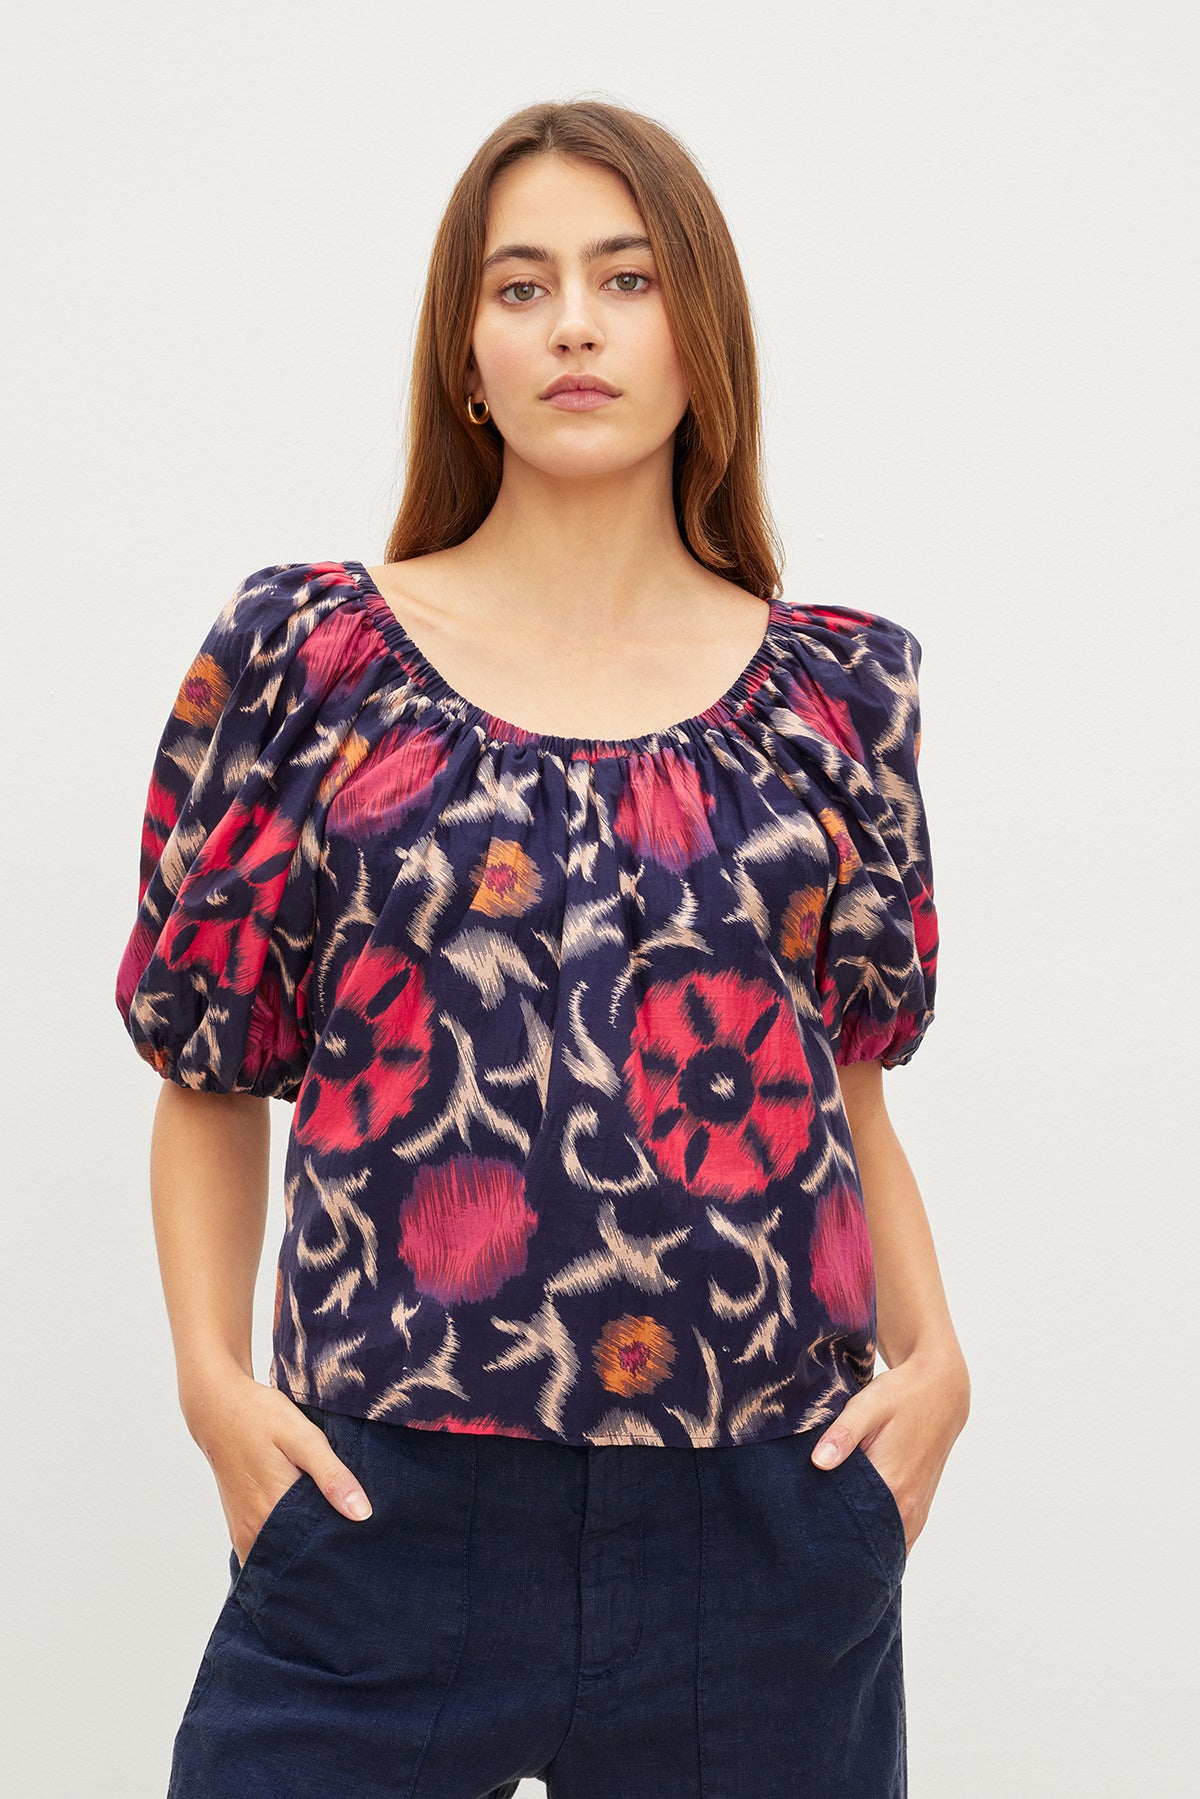 The model is wearing a Velvet by Graham & Spencer EDLIN PRINTED SILK COTTON VOILE TOP with a floral print.-35982321942721